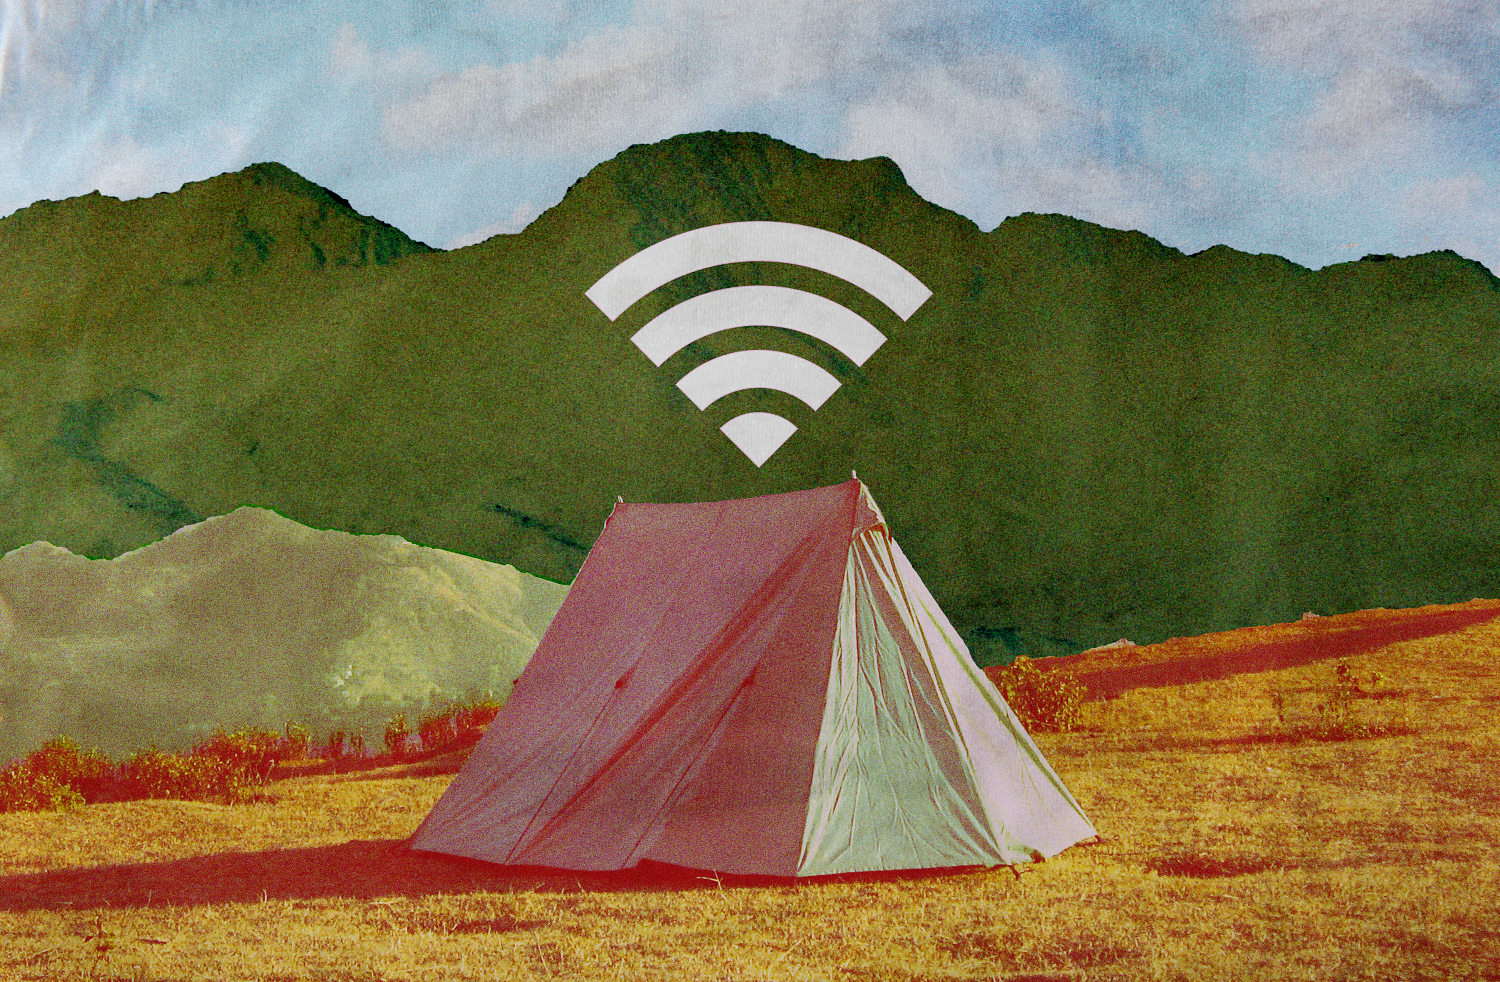 Going camping off the grid is getting harder. But admit it: You don’t mind.